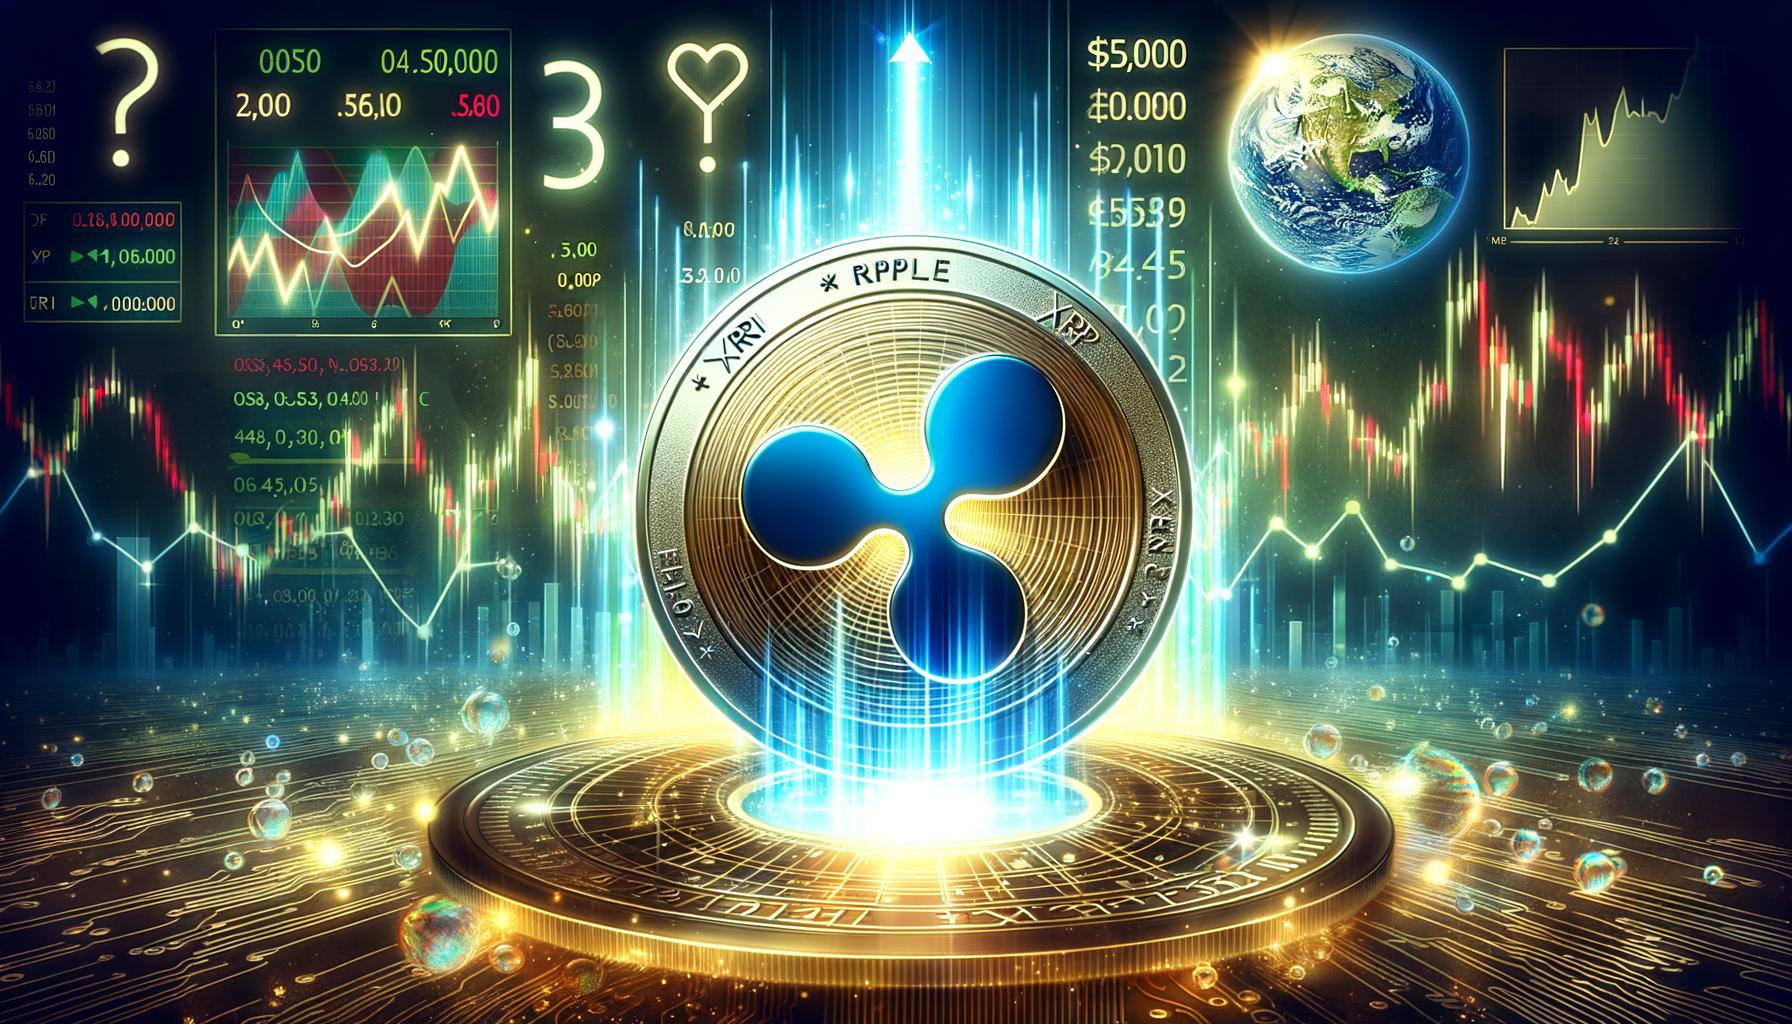 XRP Price Positioned for a Surge